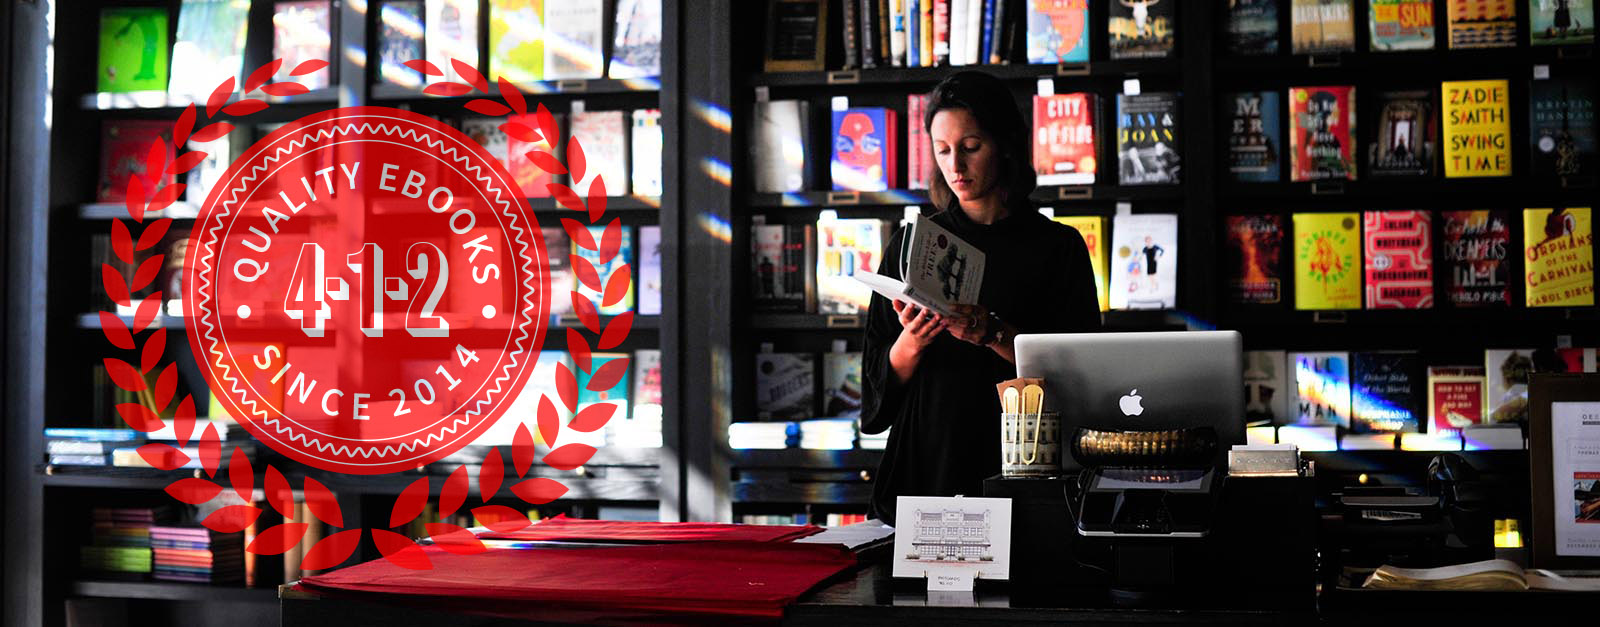 Picture of a bookseller, standing behind the counter, reading a book. There are shelves of books behind her.